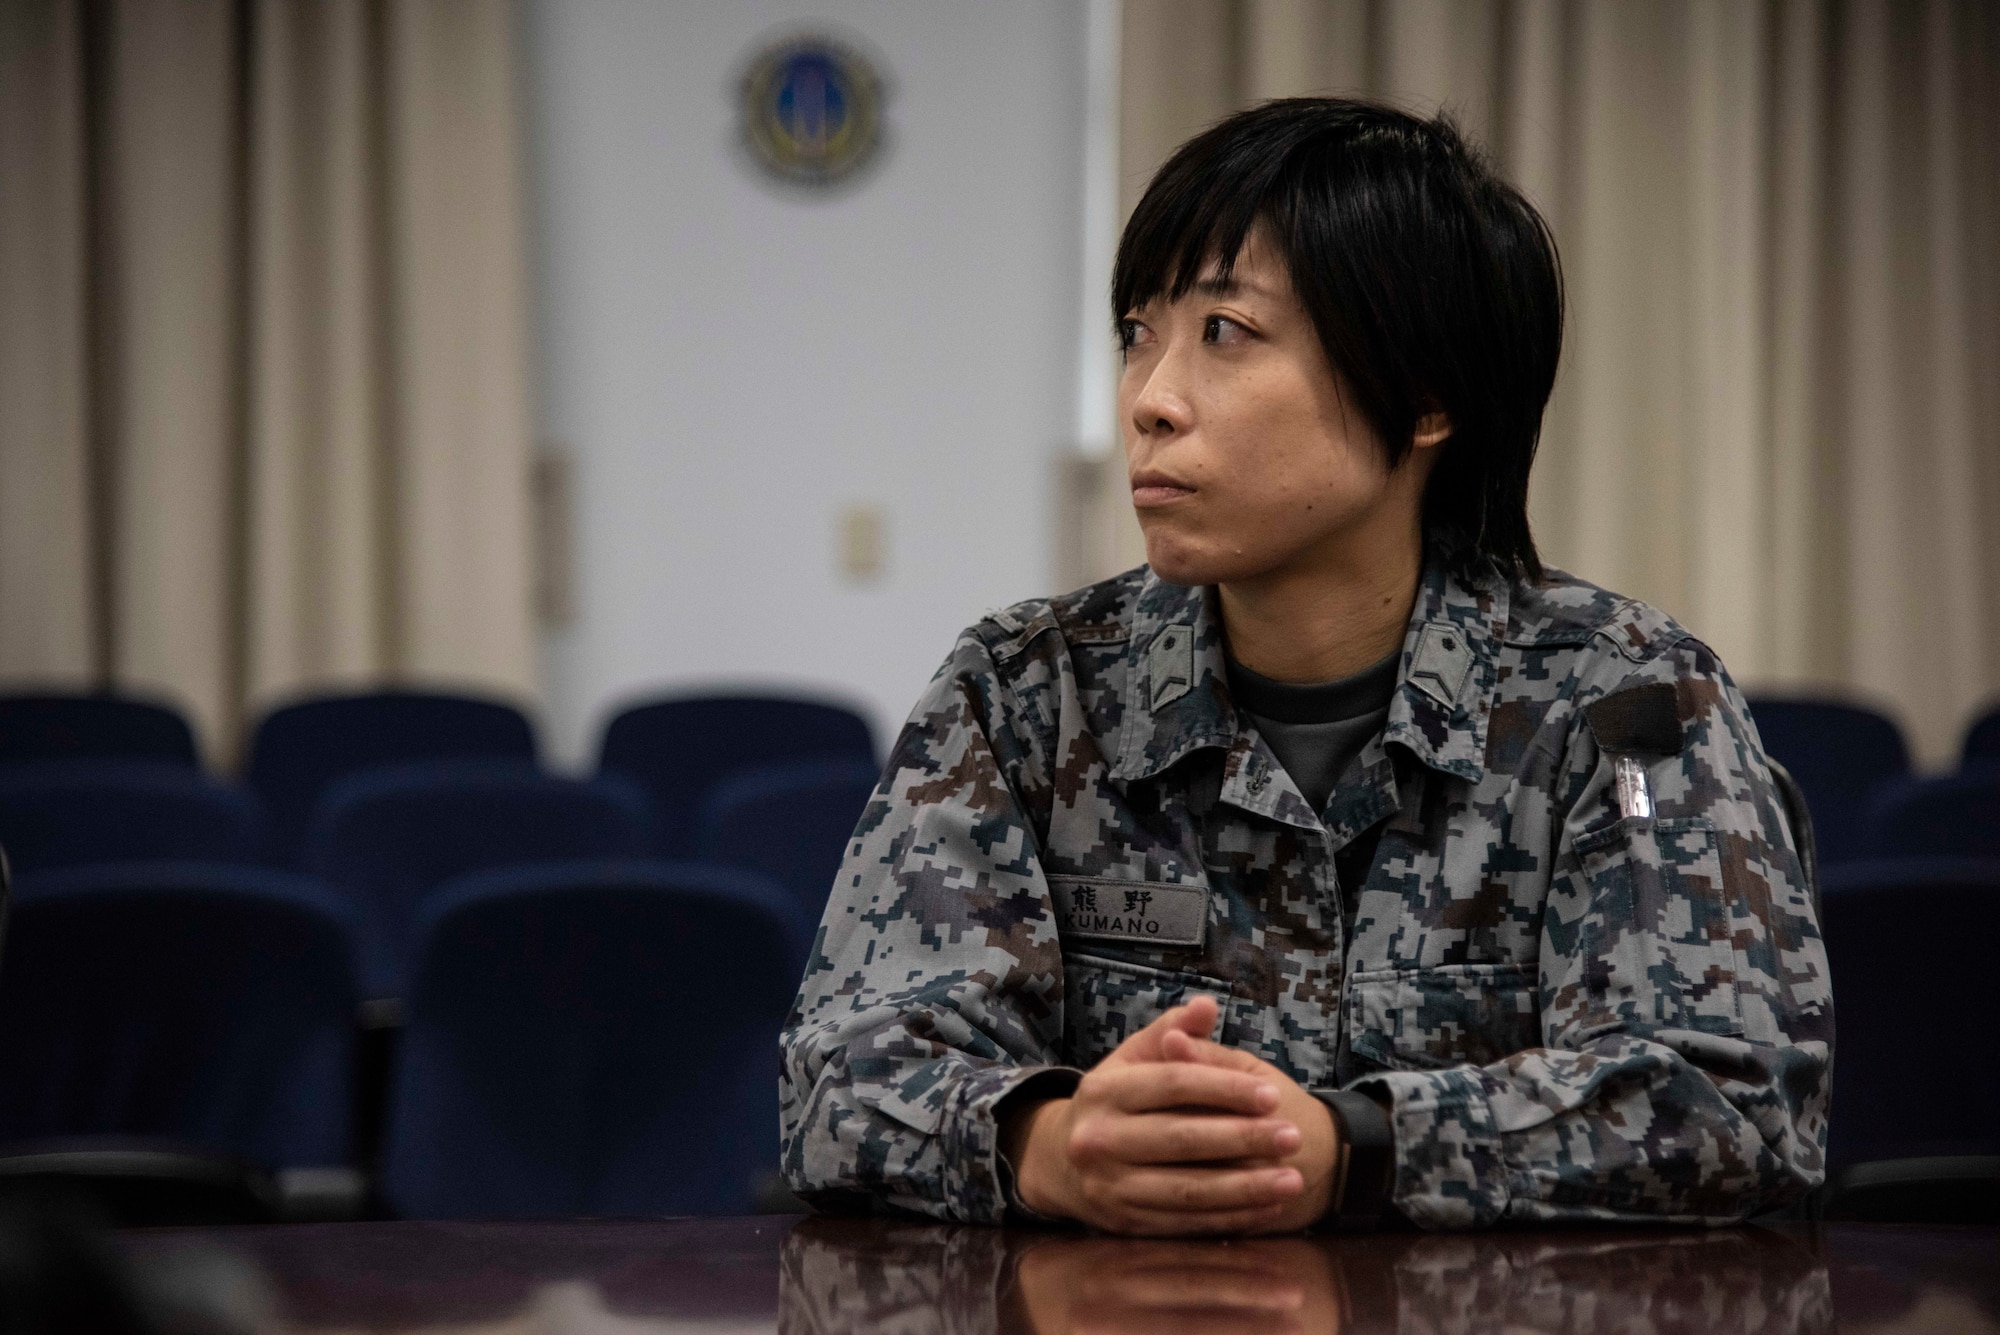 Japan Air Self-Defense Force Staff. Sgt. Kanazu Kumano, an Air Support Command Fuchu Sub Base dining facility menu creator, listens to introductions during a Bilateral Exchange Program visit at Misawa Air Base, Japan, Sept. 18, 2018. During the BEP, JASDF members from various bases partnered with Misawa AB Airmen to work together and further enhance each other’s mission tactics. (U.S. Air Force photo by Senior Airman Sadie Colbert)